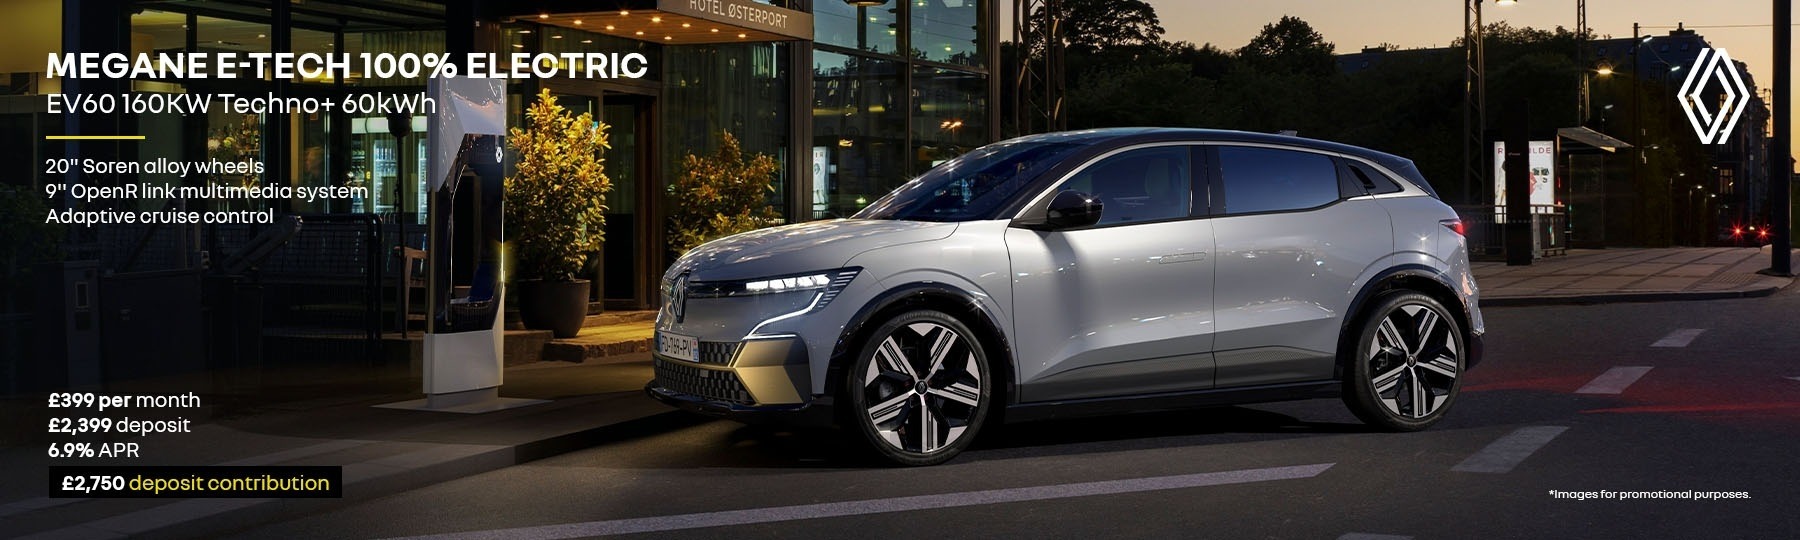 All New Renault Megane E-Tech 100% electric New Car Offer